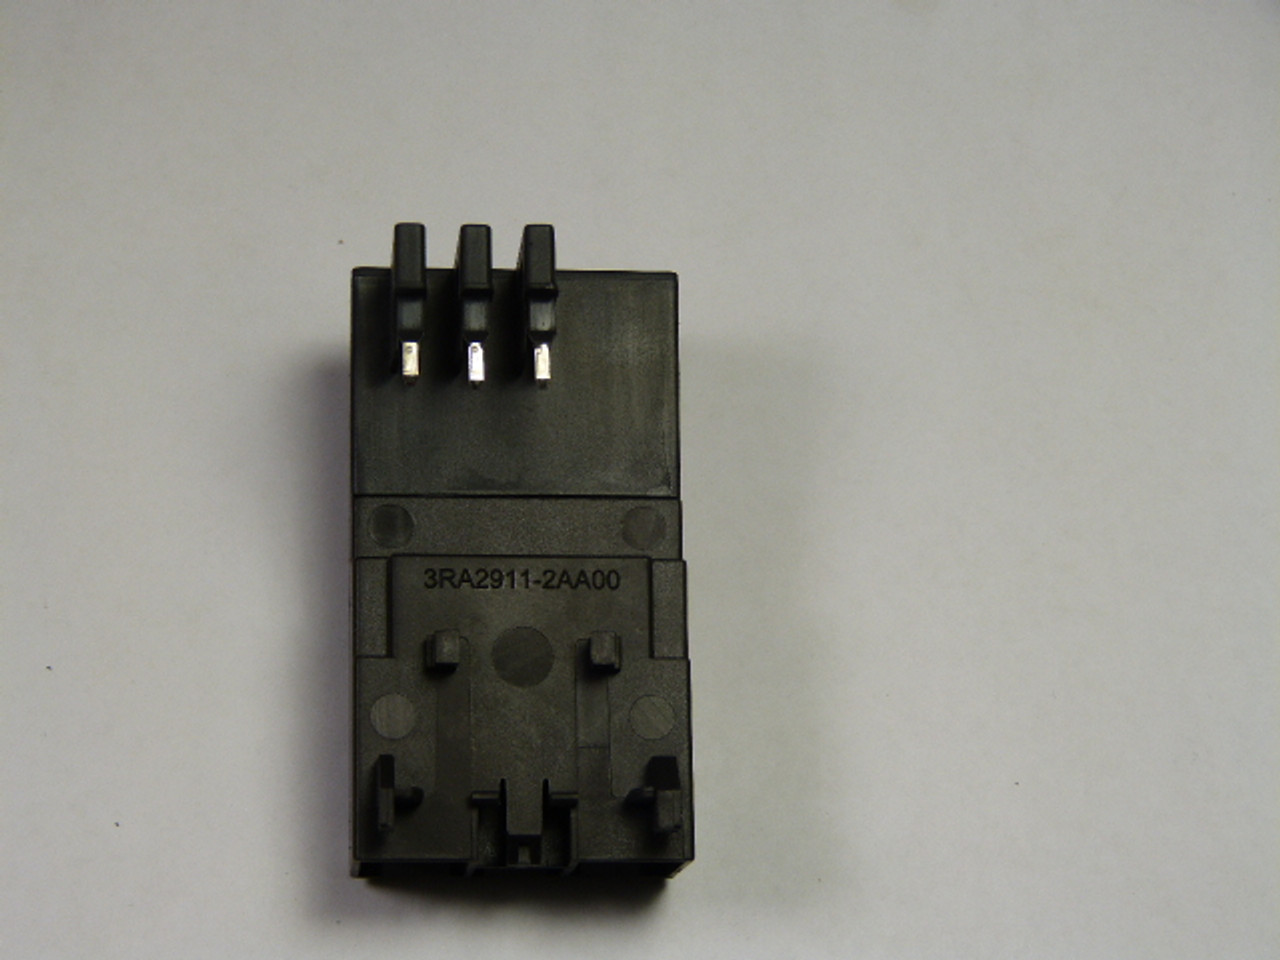 Siemens 3RA2911-2AA00 Link Module For Contactor USED